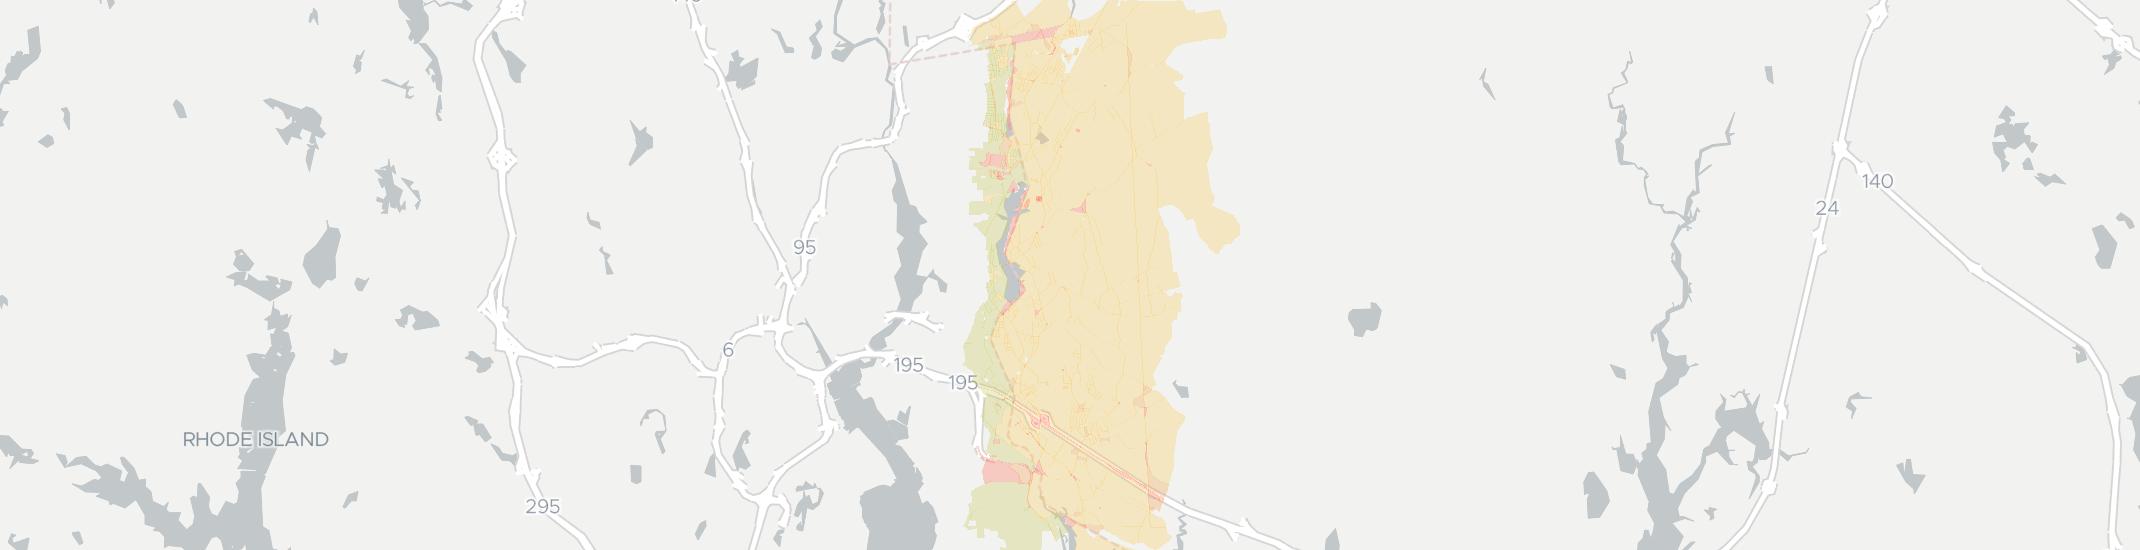 Seekonk Internet Competition Map. Click for interactive map